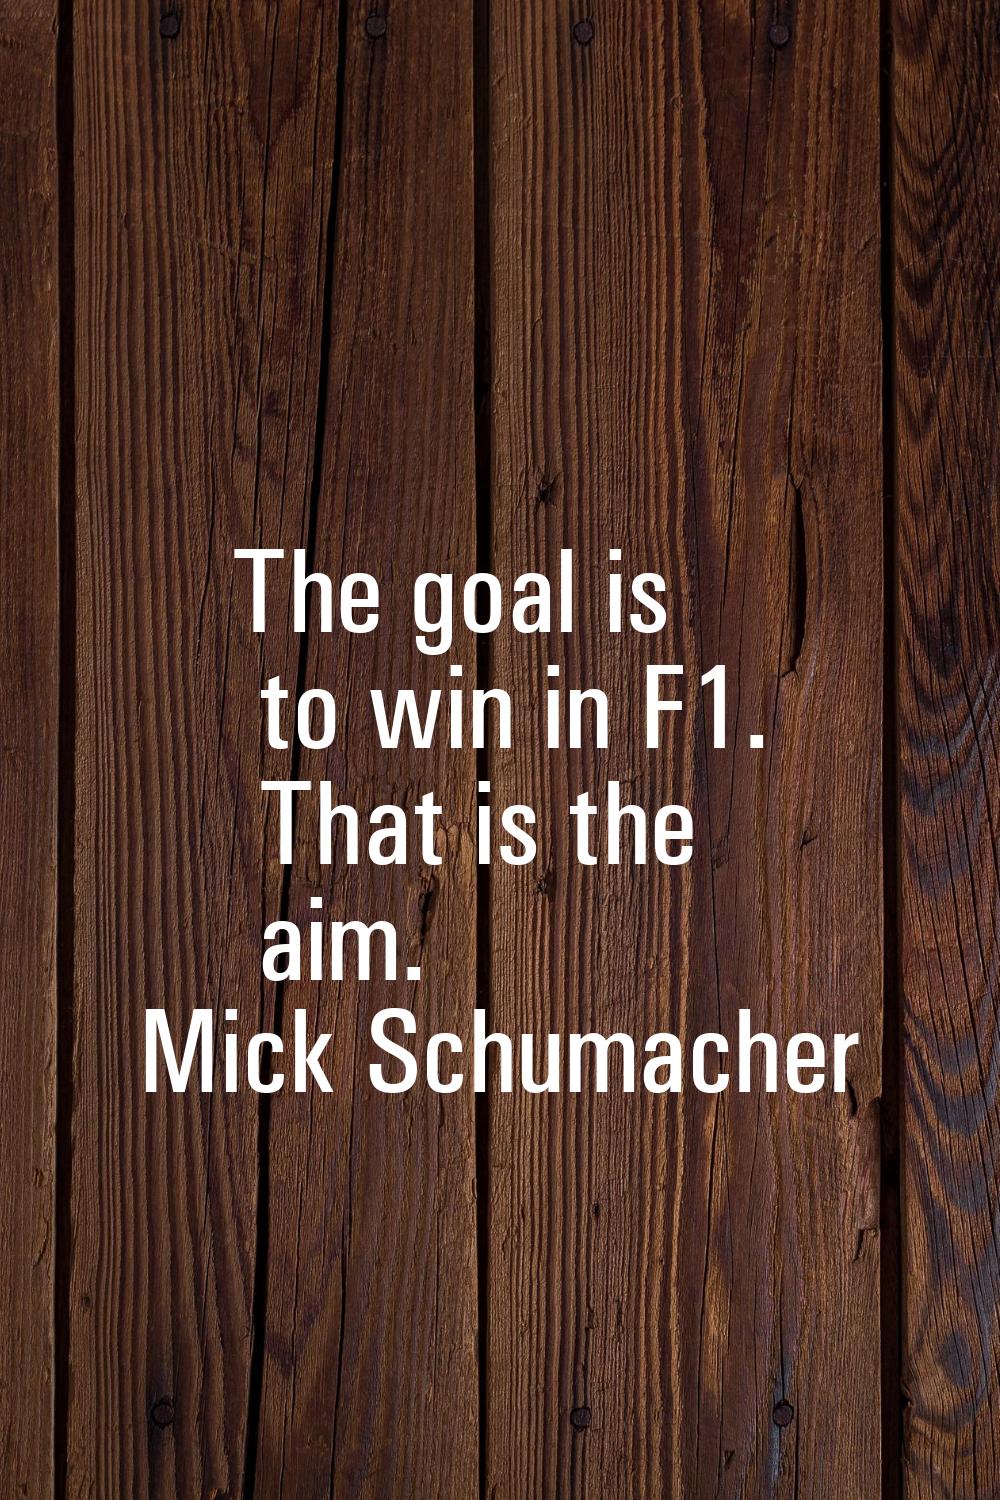 The goal is to win in F1. That is the aim.